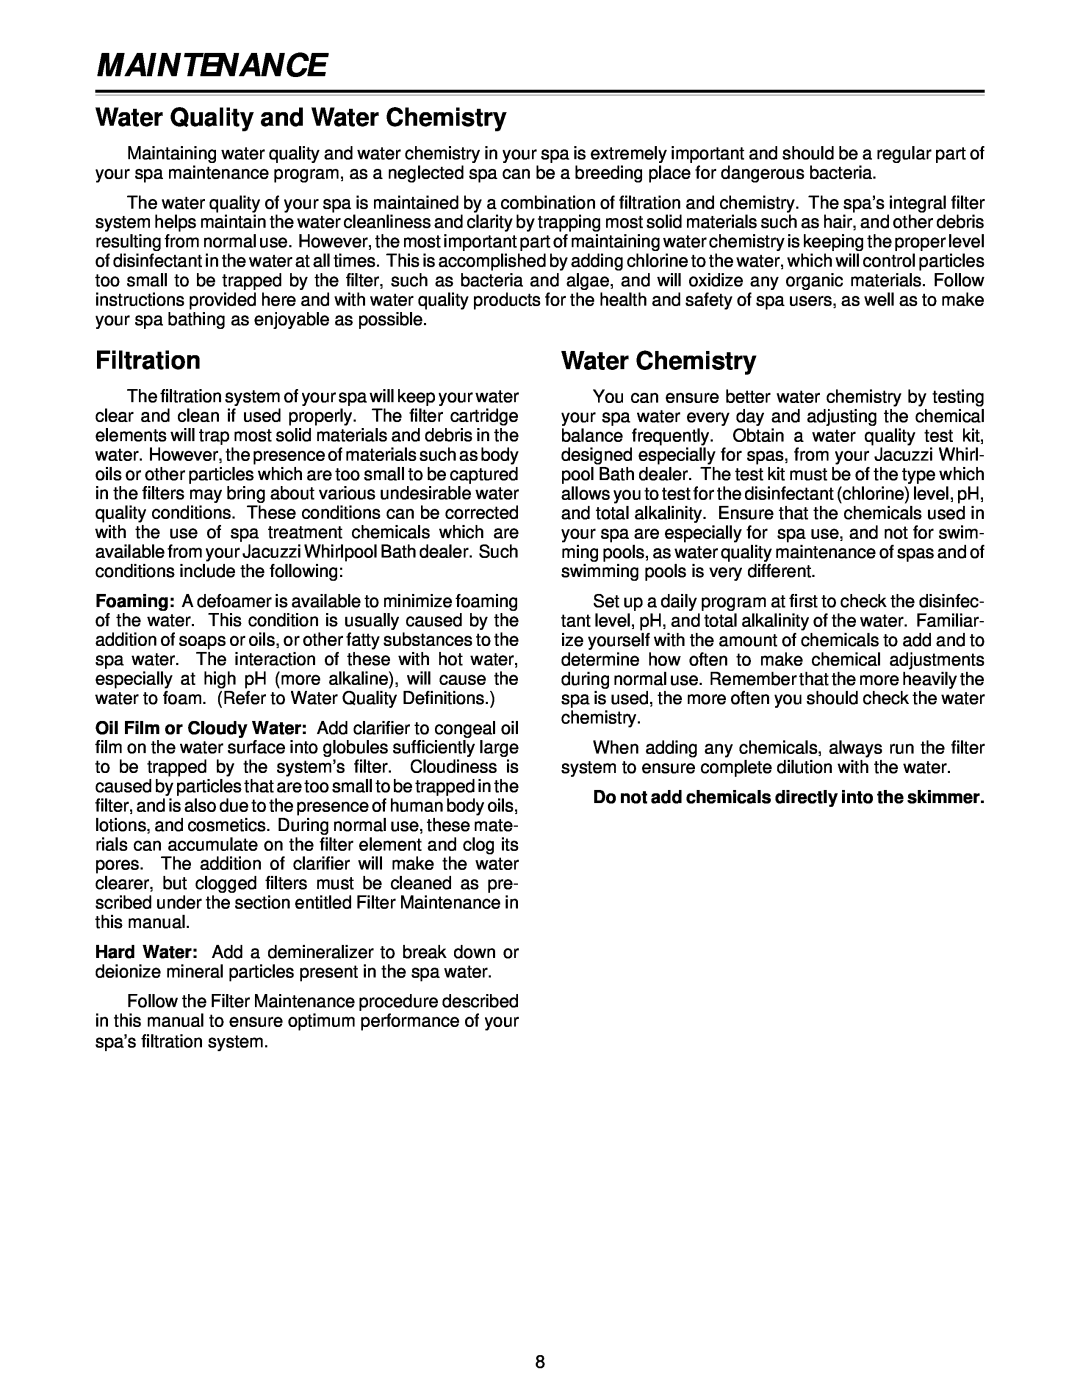 Jacuzzi Z101 owner manual Maintenance, Water Quality and Water Chemistry, Filtration 